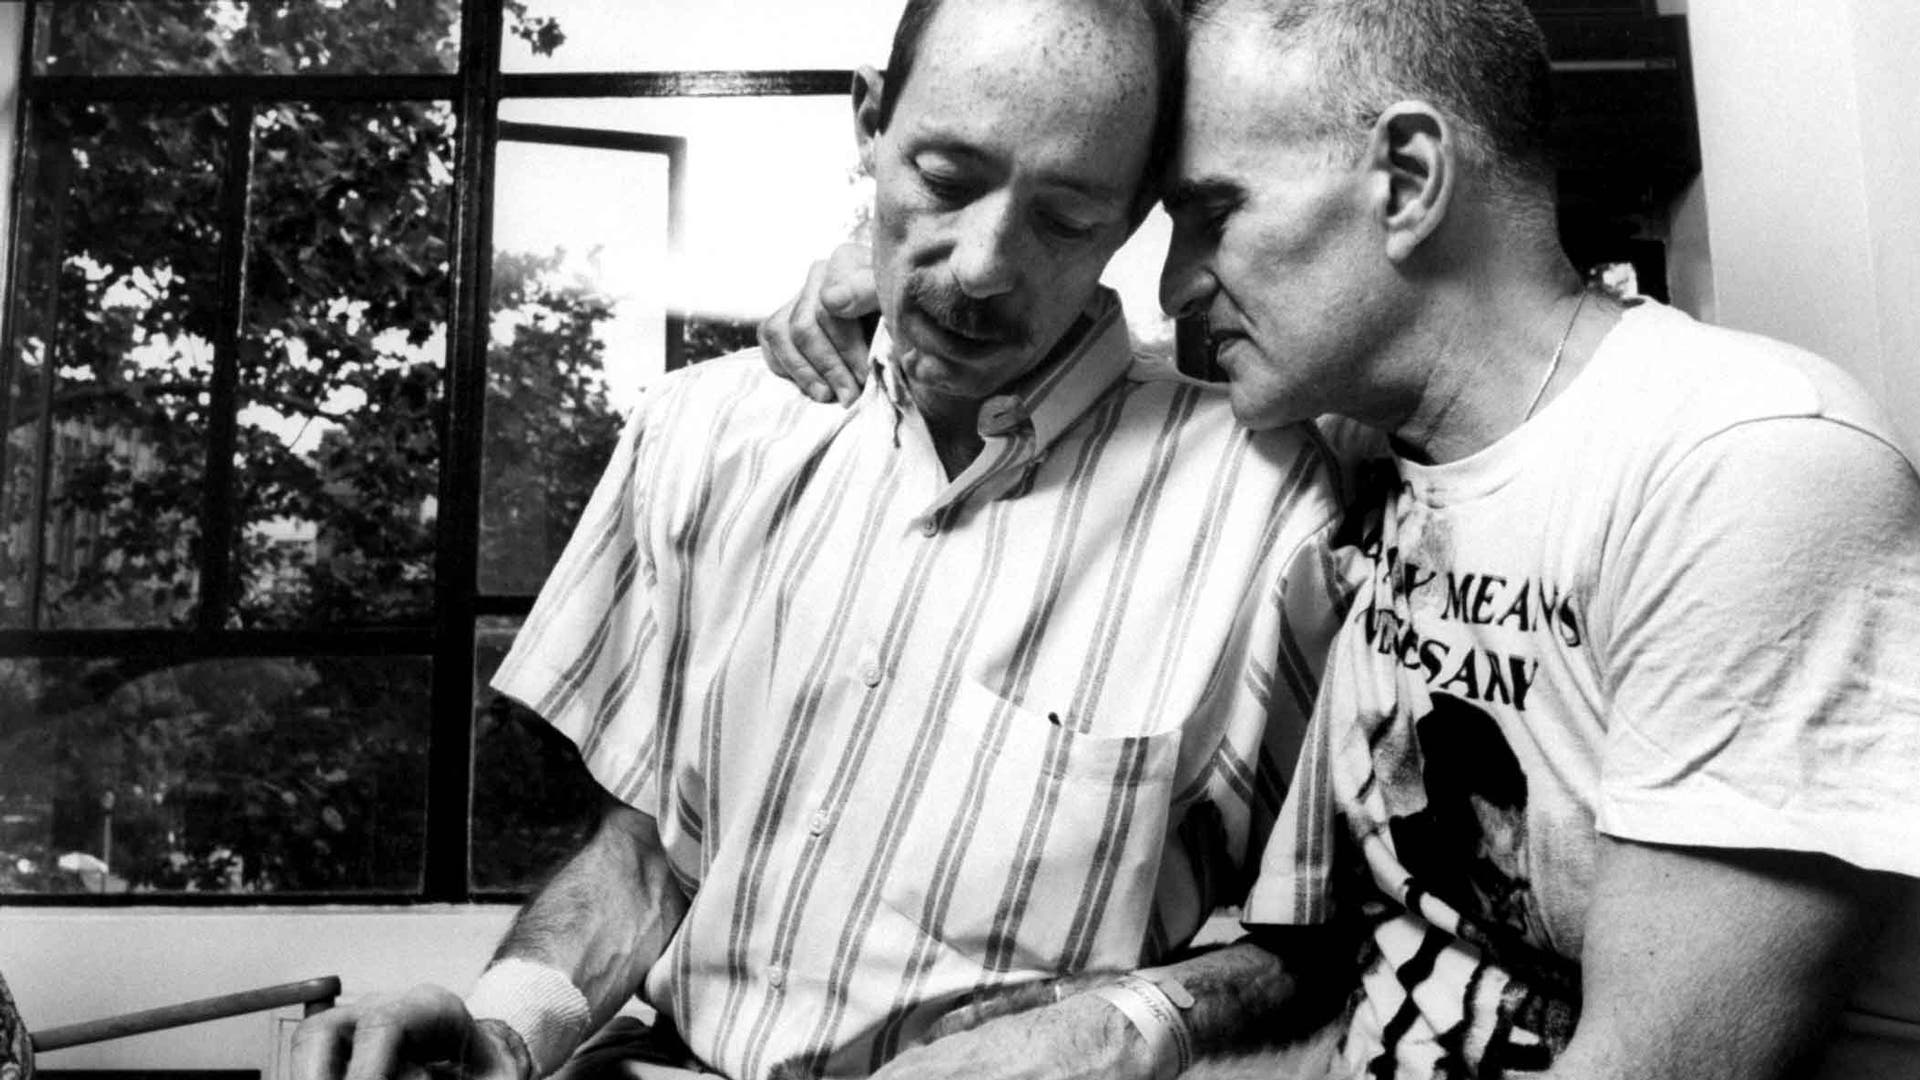 Author/gay activist Larry Kramer, founder of ACT UP, snuggling w. his friend, author & AIDS victim Vito Russo, as he tries to comfort him while petting his dog at home